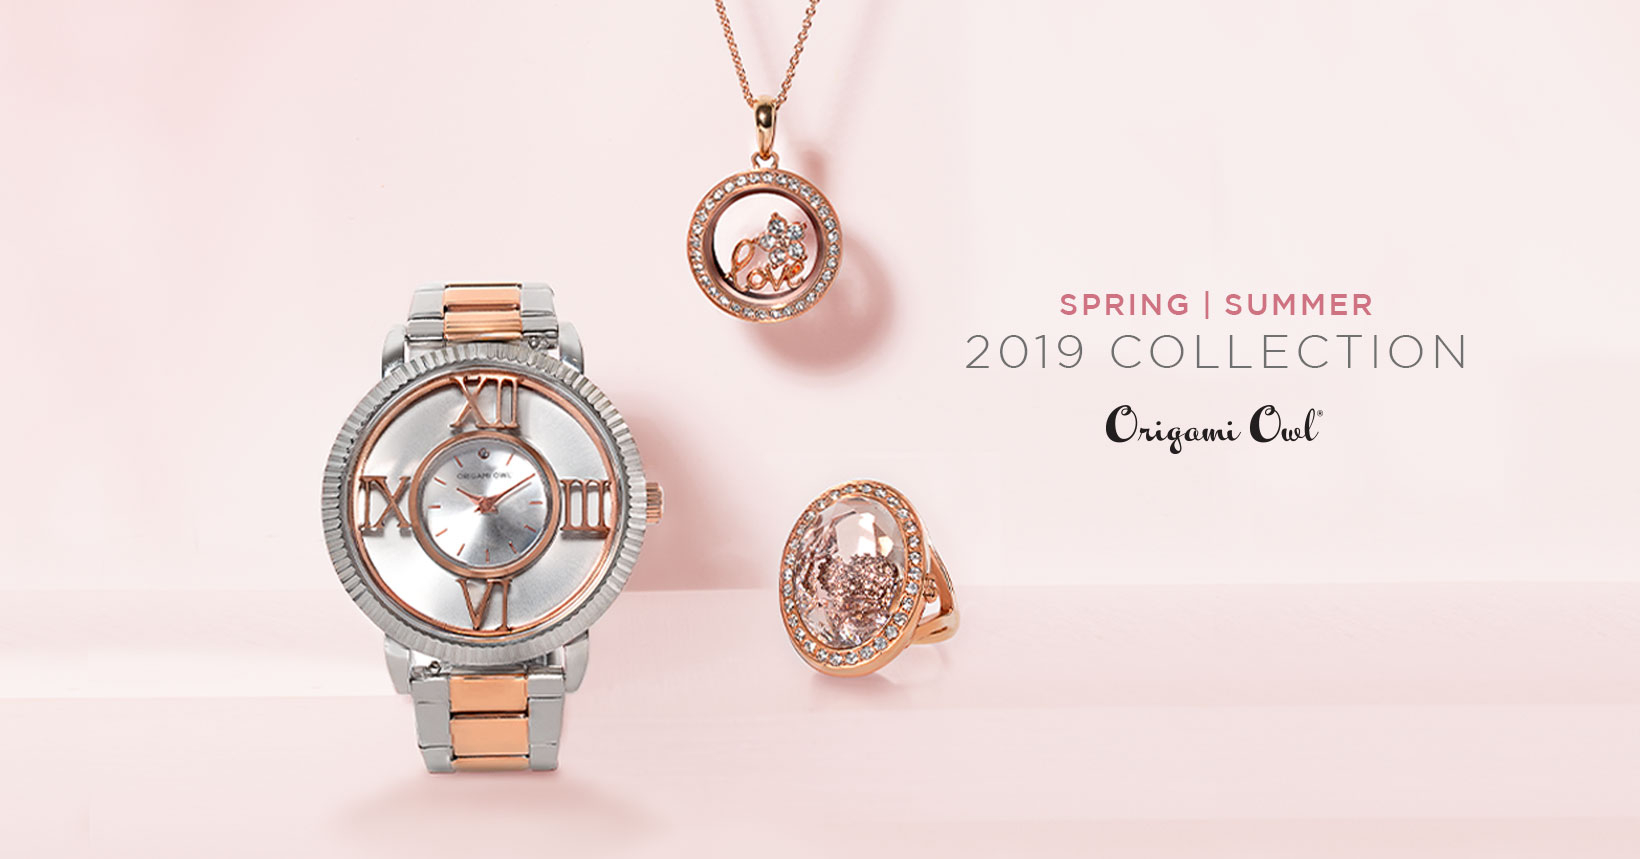 Origami Owl Summer The New Springsummer 2019 Collection Has Arrived Origamiowlnews